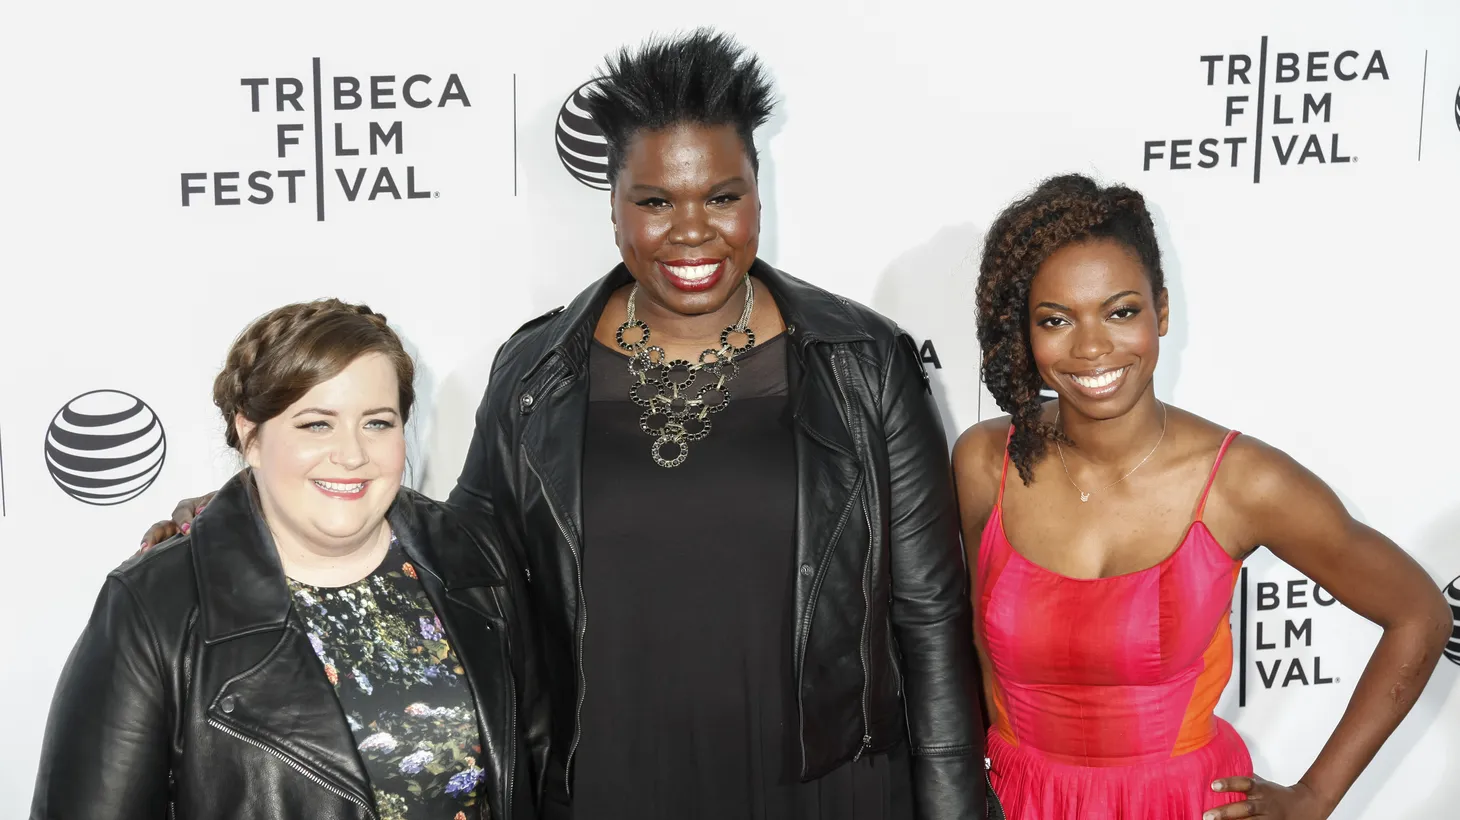 “Saturday Night Live” actors (L-R) Aidy Bryant, Leslie Jones and Sasheer Zamata attend the world premiere of the documentary “Live from New York!” during the Tribeca Film Festival at The Beacon Theatre in New York on April 15, 2015.